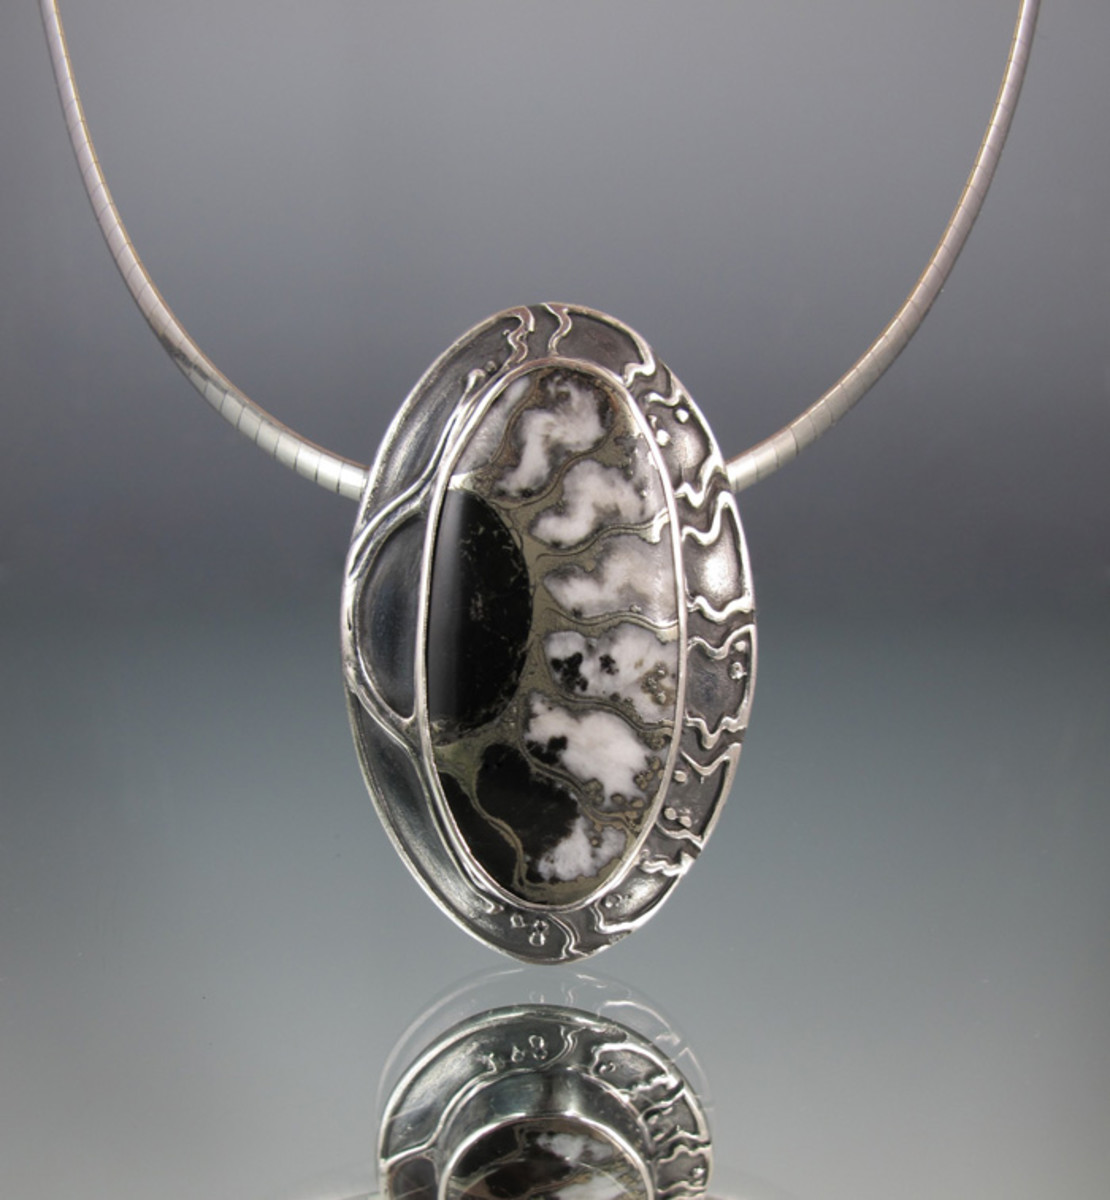 Bezel Setting Gemstones in Metal Clay: Review of Lisa Barth's 